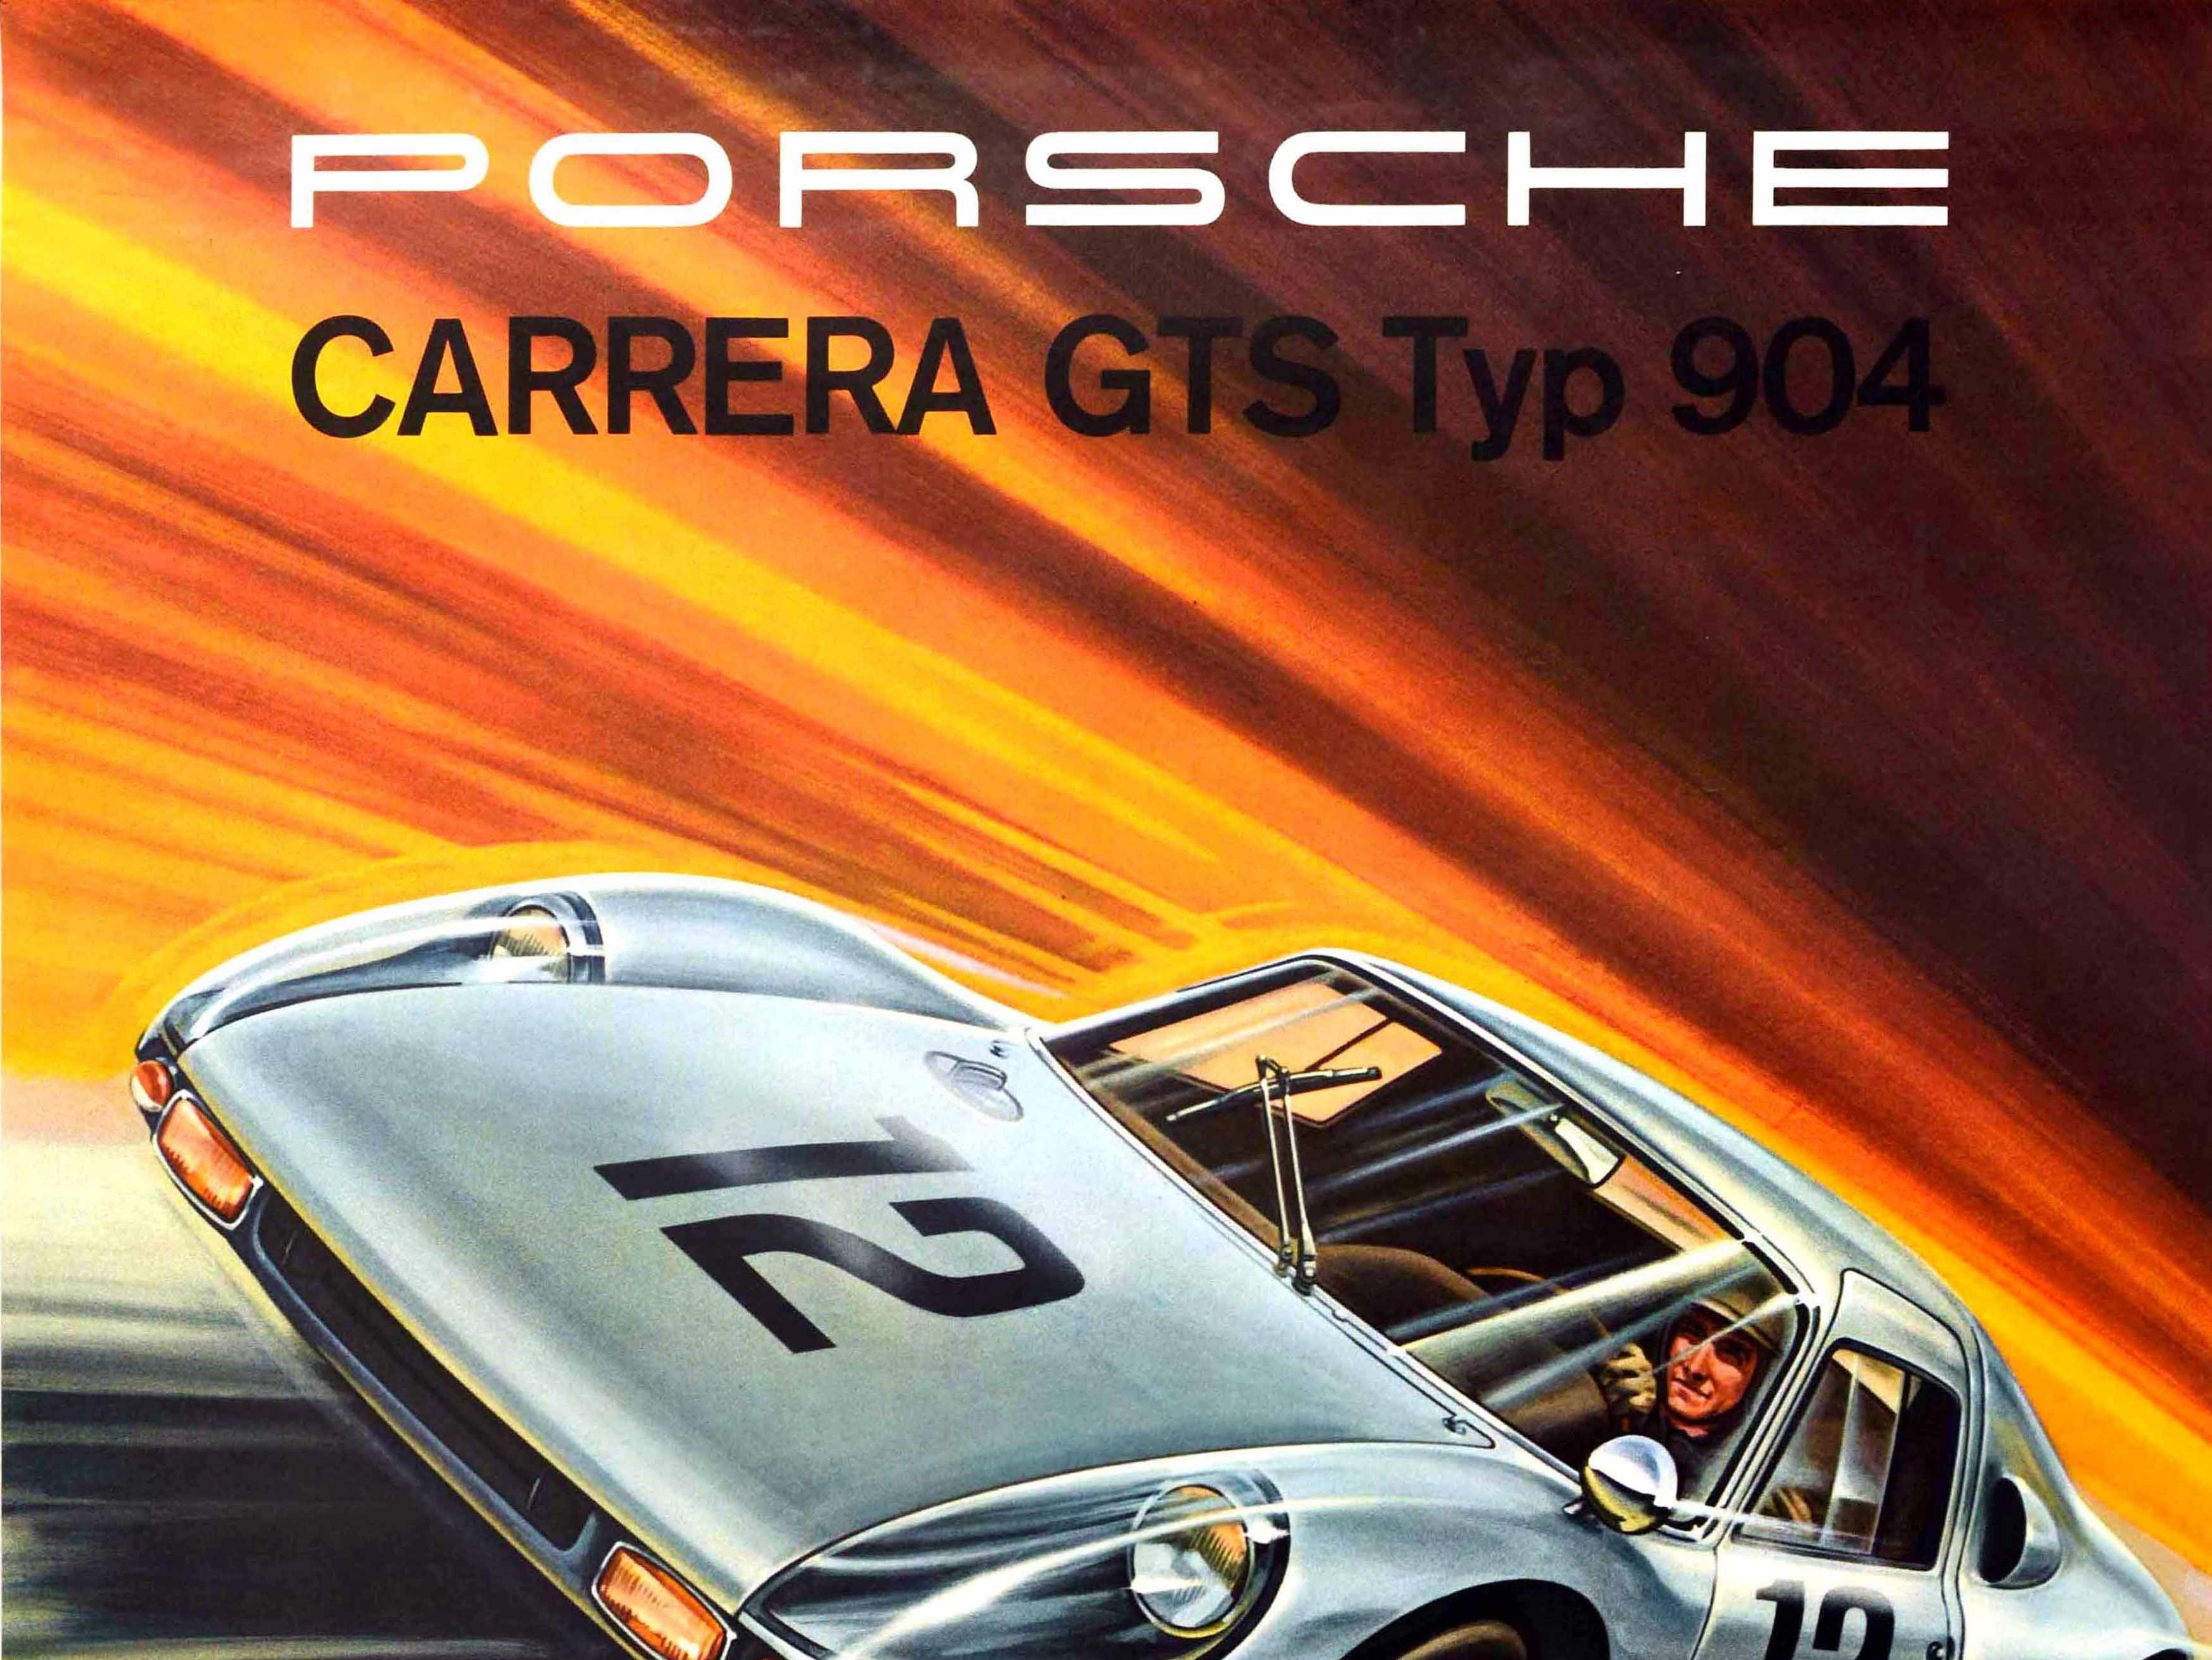 Original vintage motorsport poster for Porsche Carrera GTS Typ 904 featuring a dynamic design by Erich Strenger (1922-1993) of a driver in a Porsche car racing at speed in front of an orange and yellow blur background, the races listed below - 48